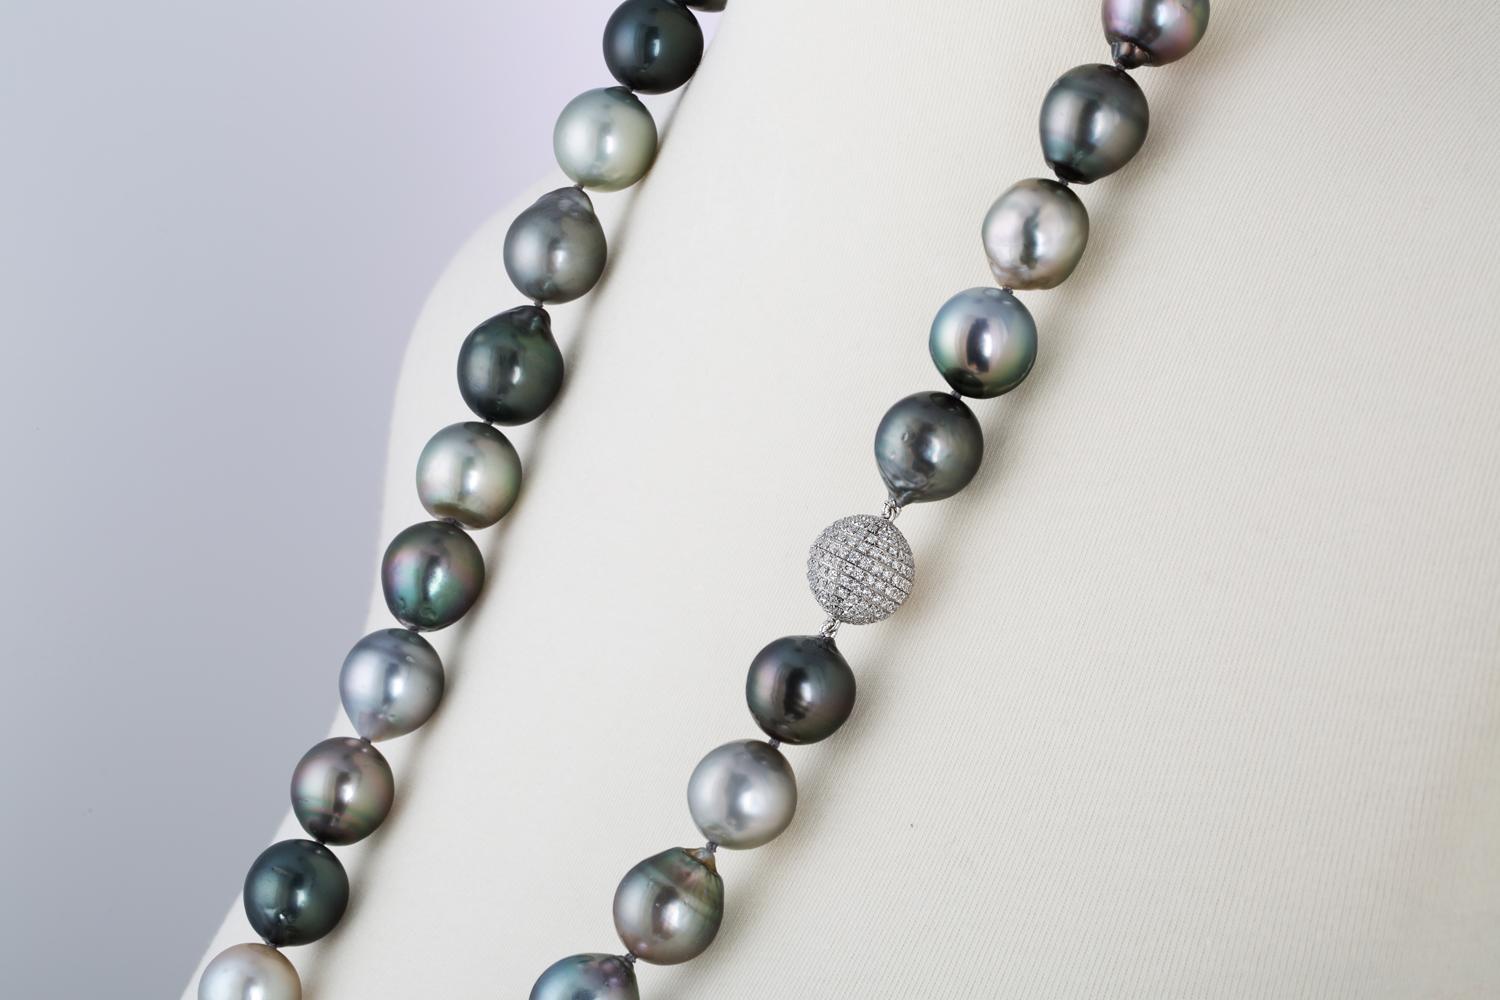 This necklace consists of fine quality South Sea Tahitian multi-colored Baroque cultured pearls measuring 15x17.7mm. The pearls have very high luster in silver, green, bronze, grey and charcoal hues with very few blemishes. The necklace measures 36